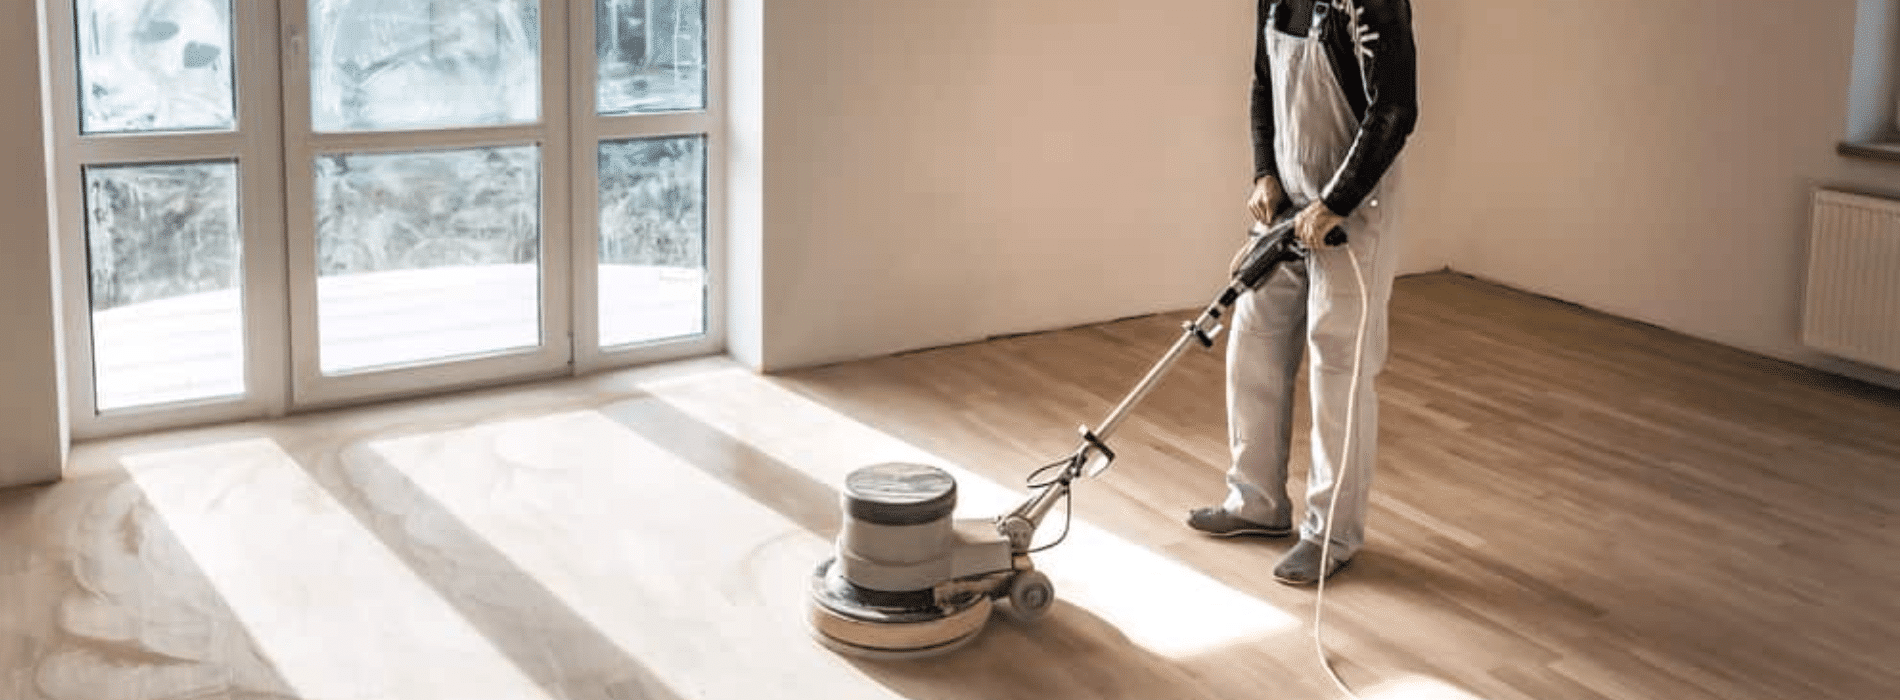 Mr Sander® in Southgate, N14 utilizing Bona buffer sander for exceptional results. The powerful 2.2 kW sander operates at 220V, 40 Hz/50 Hz frequency. Connected to a HEPA-filtered dust extraction system, it guarantees a clean and efficient outcome.